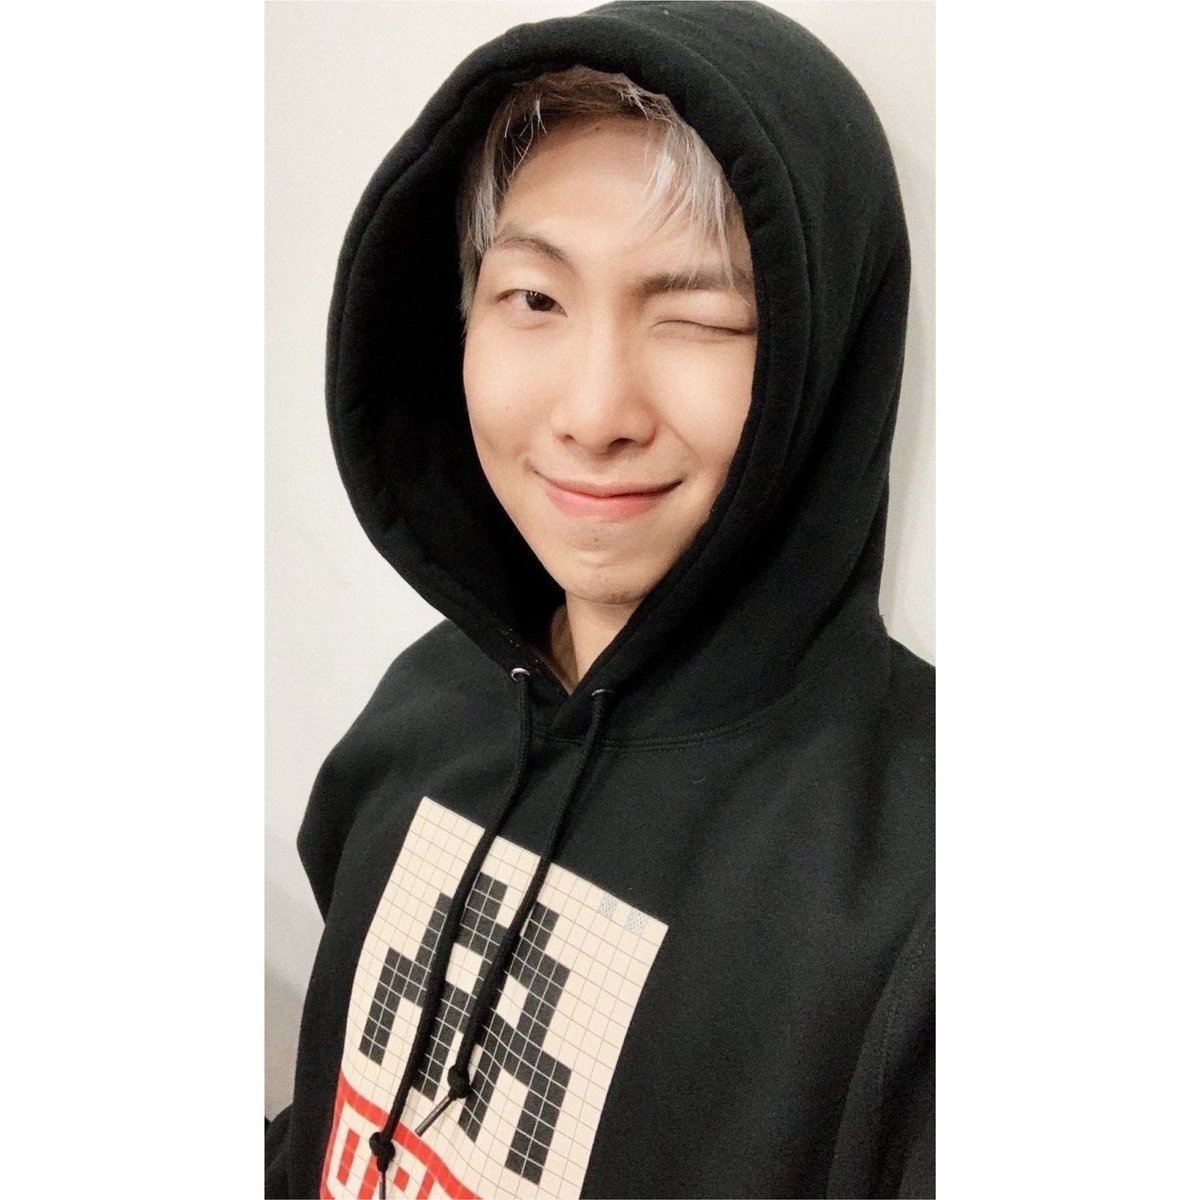 D-417 until Namjoon gets discharged

🏠: 10. June 2025

🖼️: fav selfie

#Namjoon #KimNamjoon #RM #BTS #Army #Rkive 

Follow & turn on the 🔔 to not miss any daily countdown :)